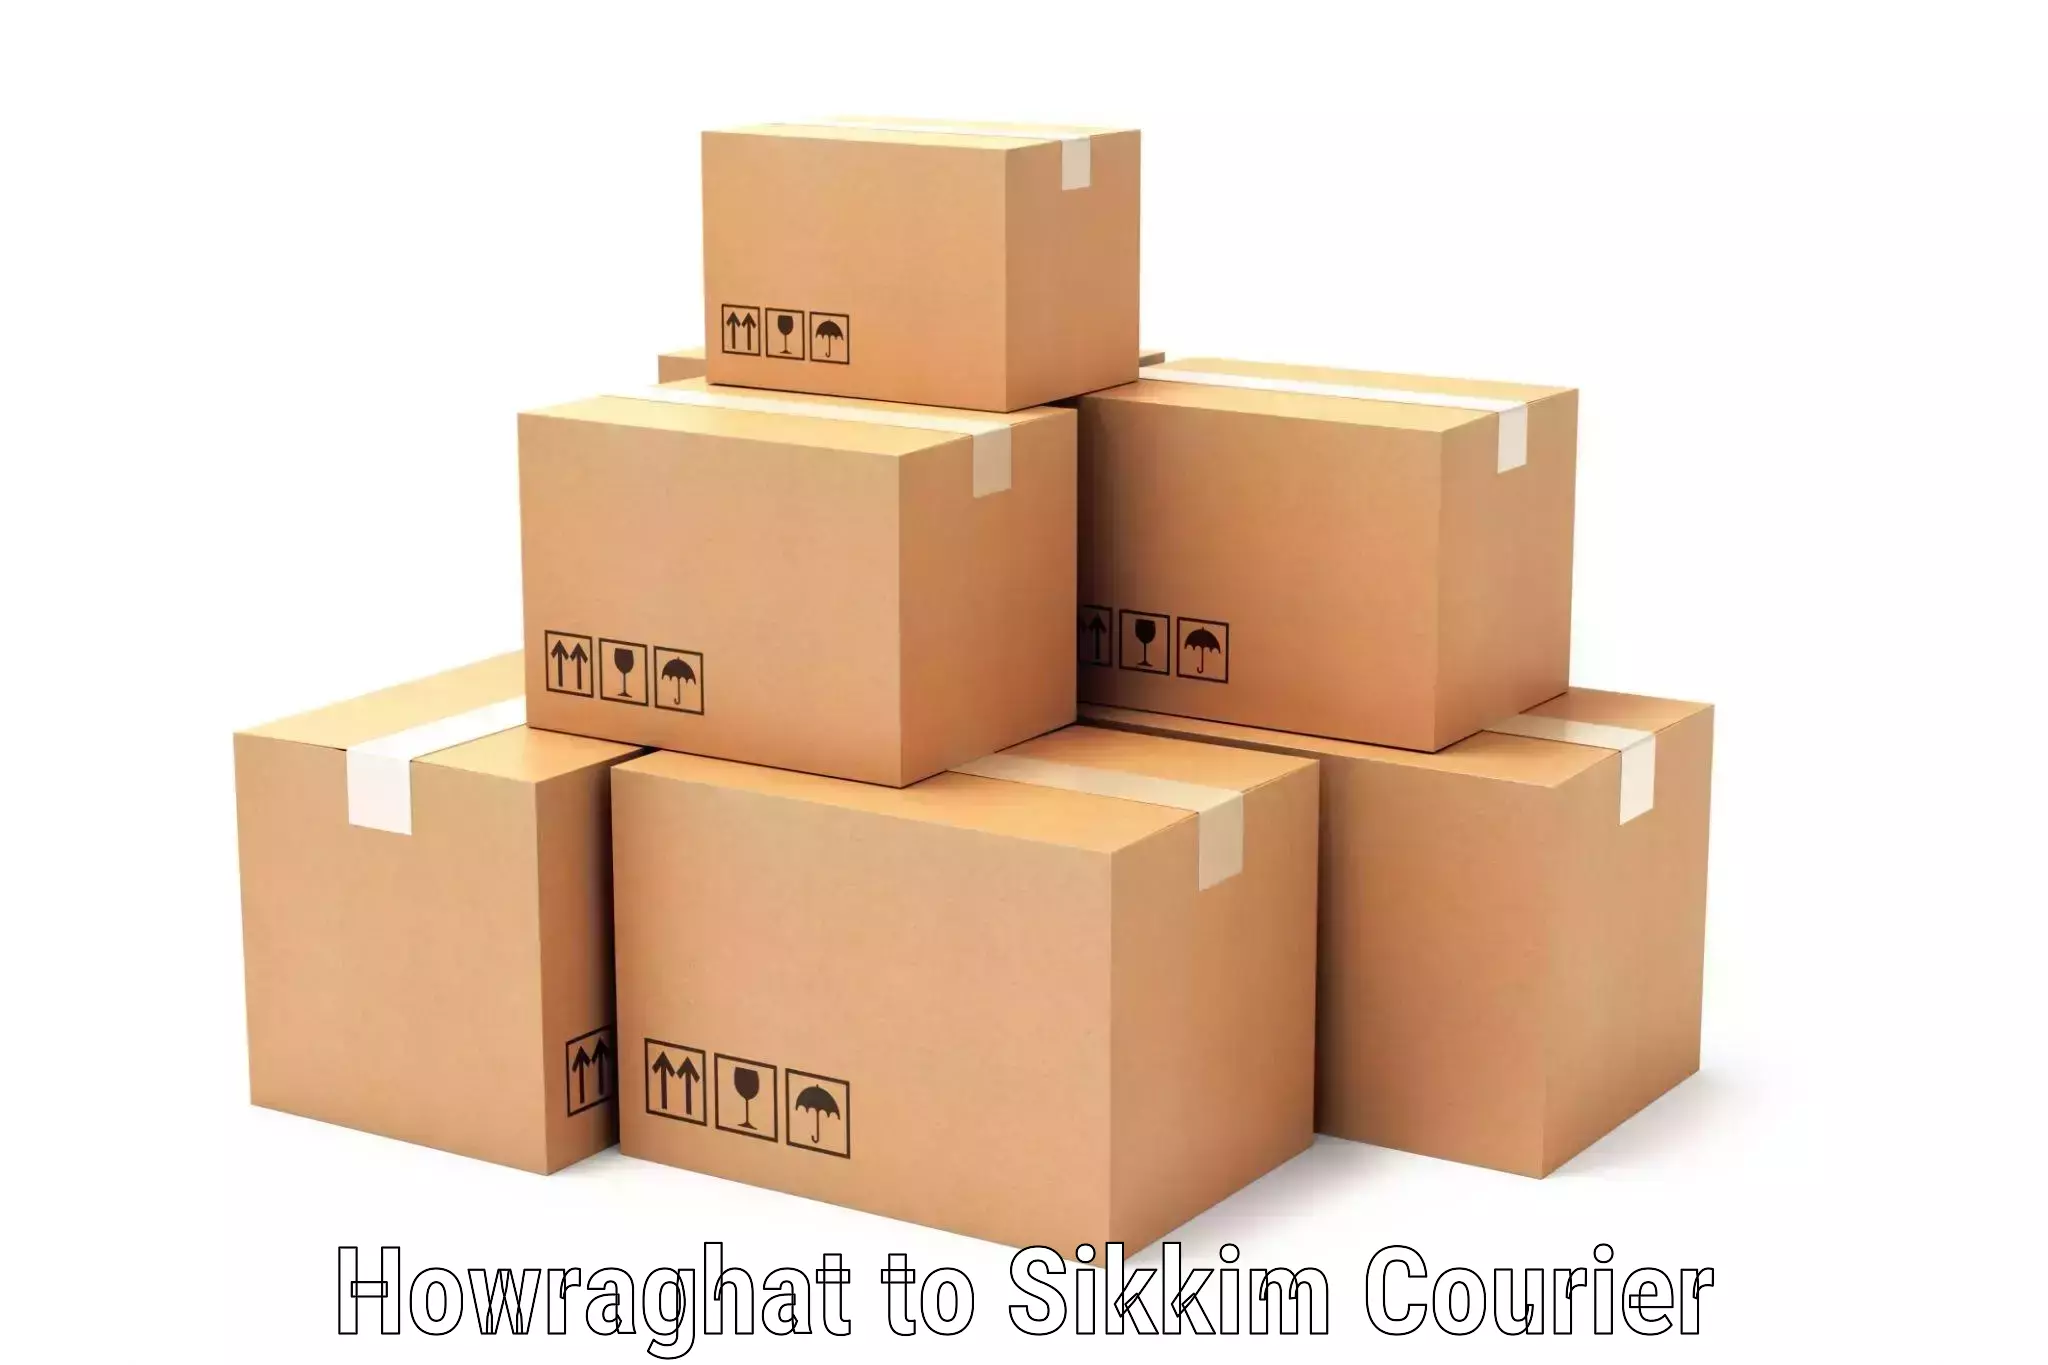 Expedited shipping solutions Howraghat to Pelling